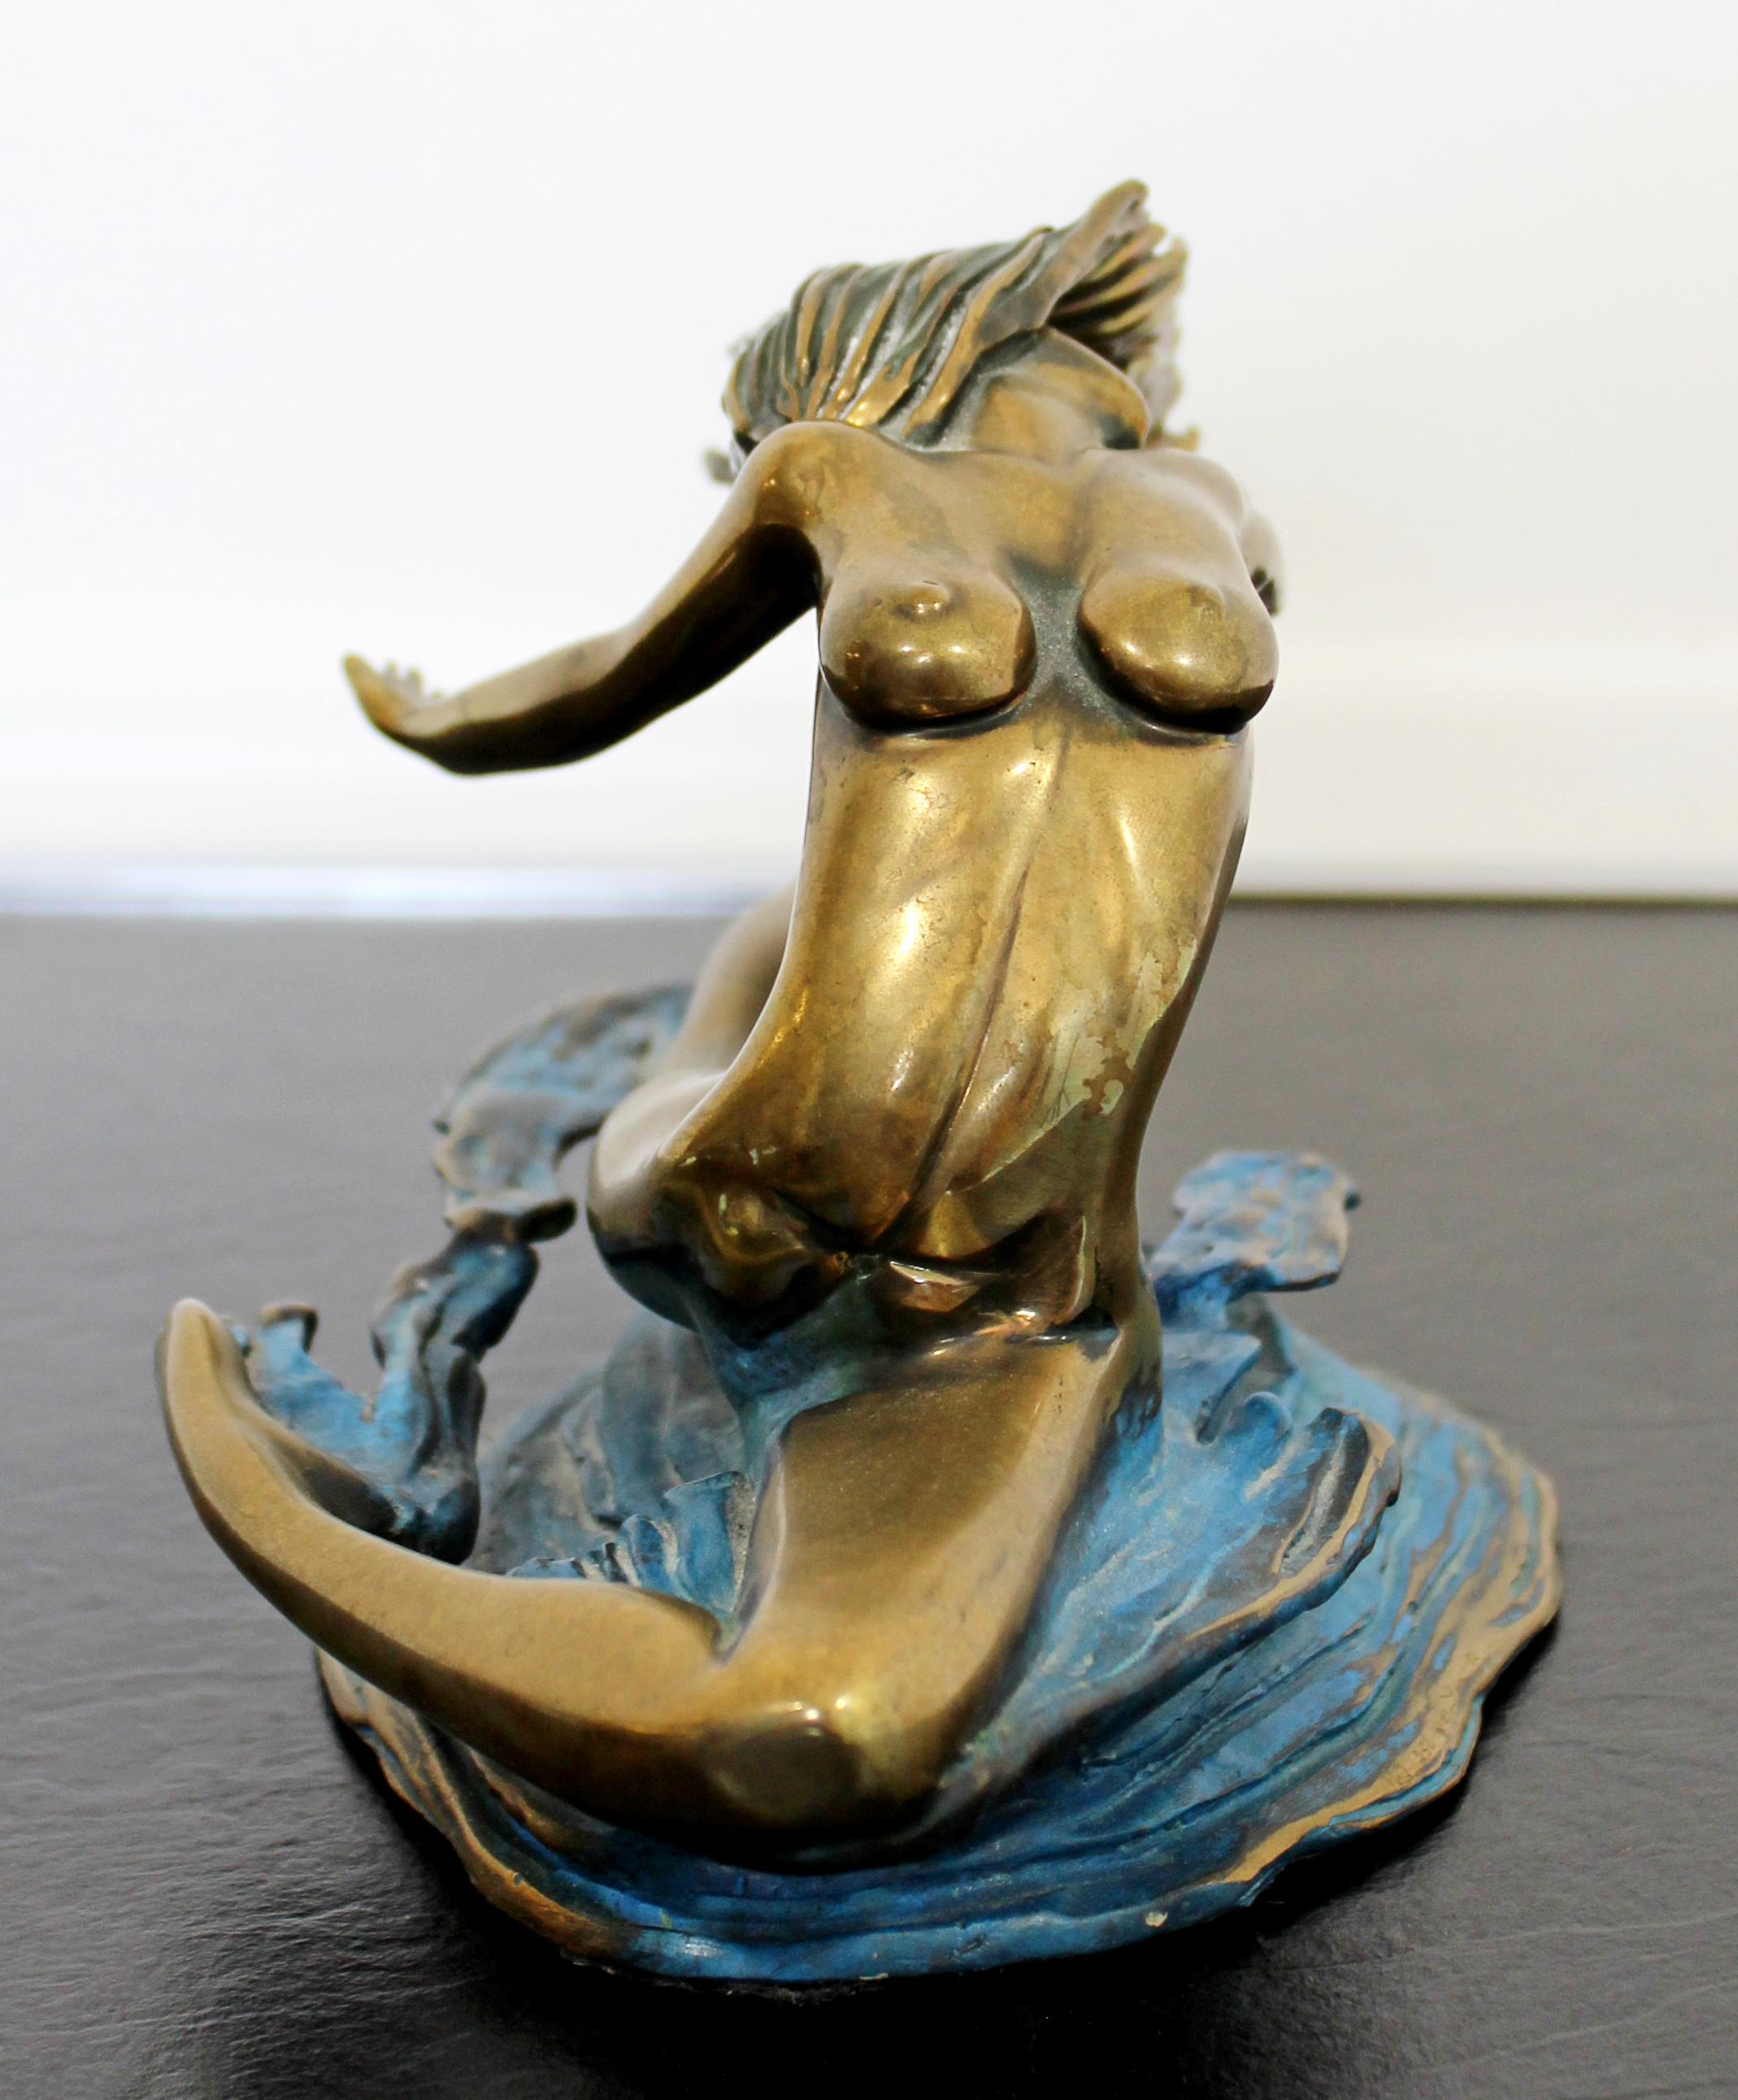 Late 20th Century Contemporary Modern Bronze Table Sculpture Signed Tom Bennett 1990s Nude Woman